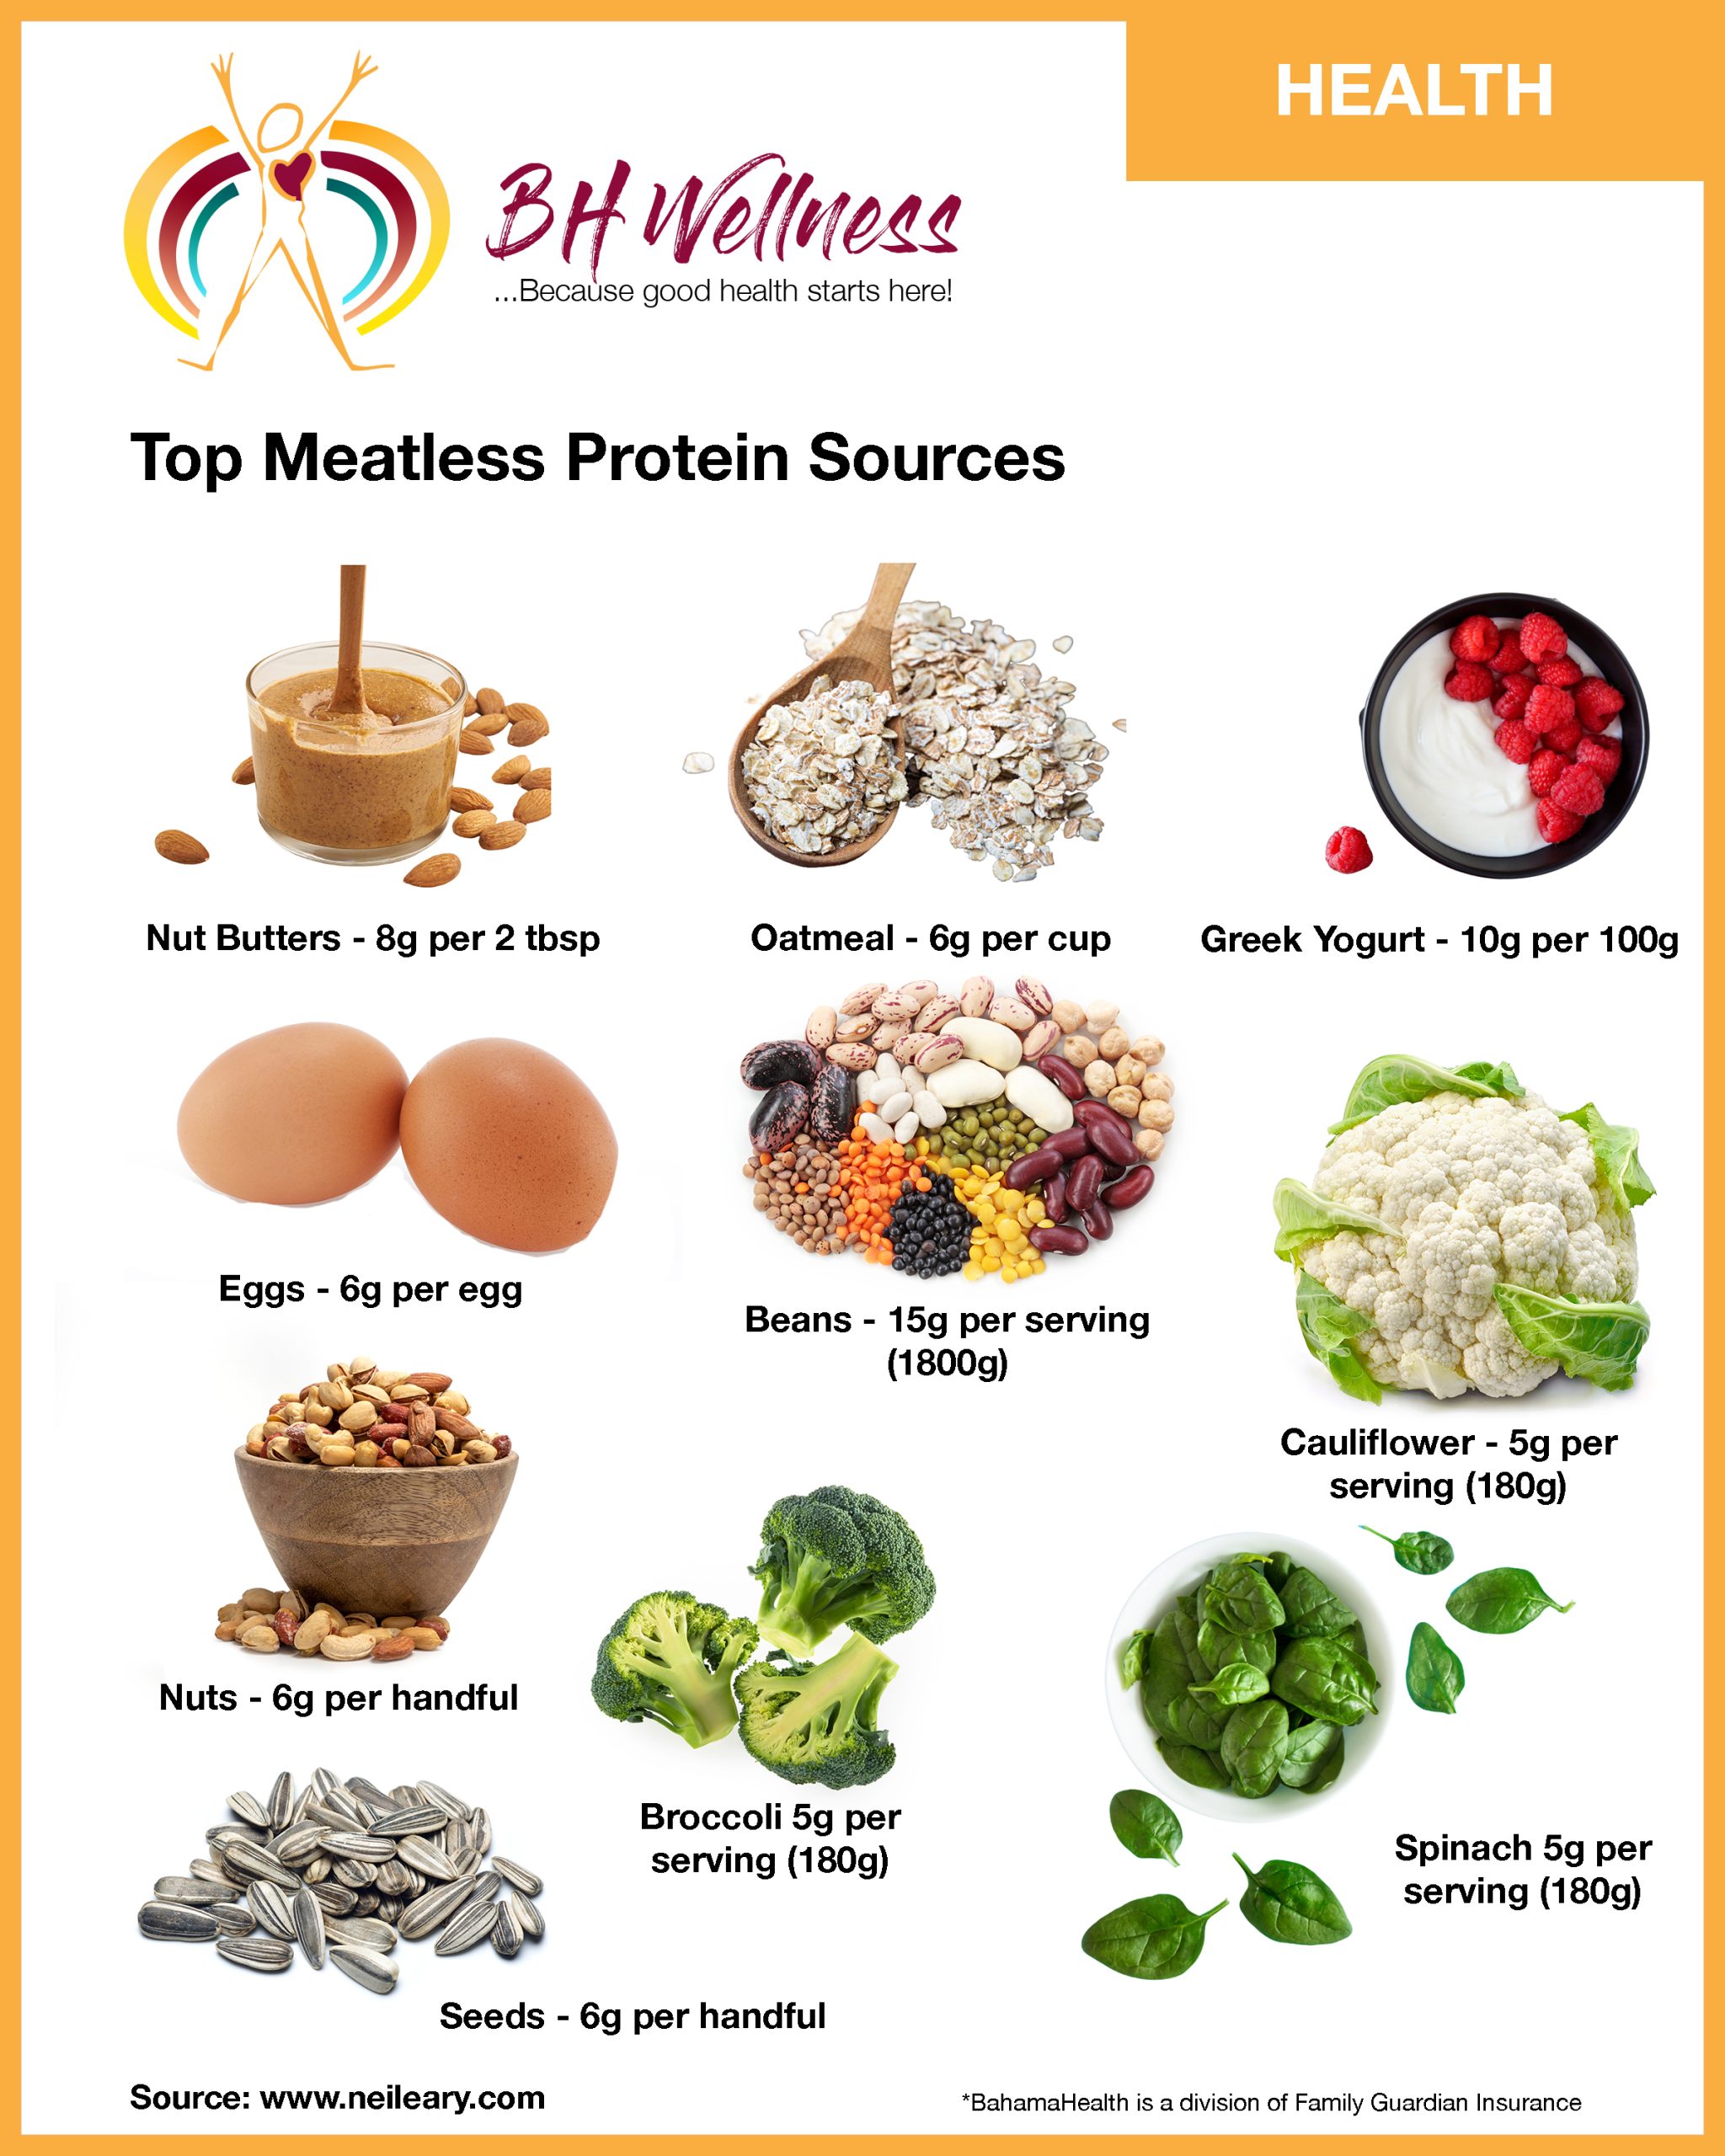 Top Meatless Protein Sources - Bahama Health